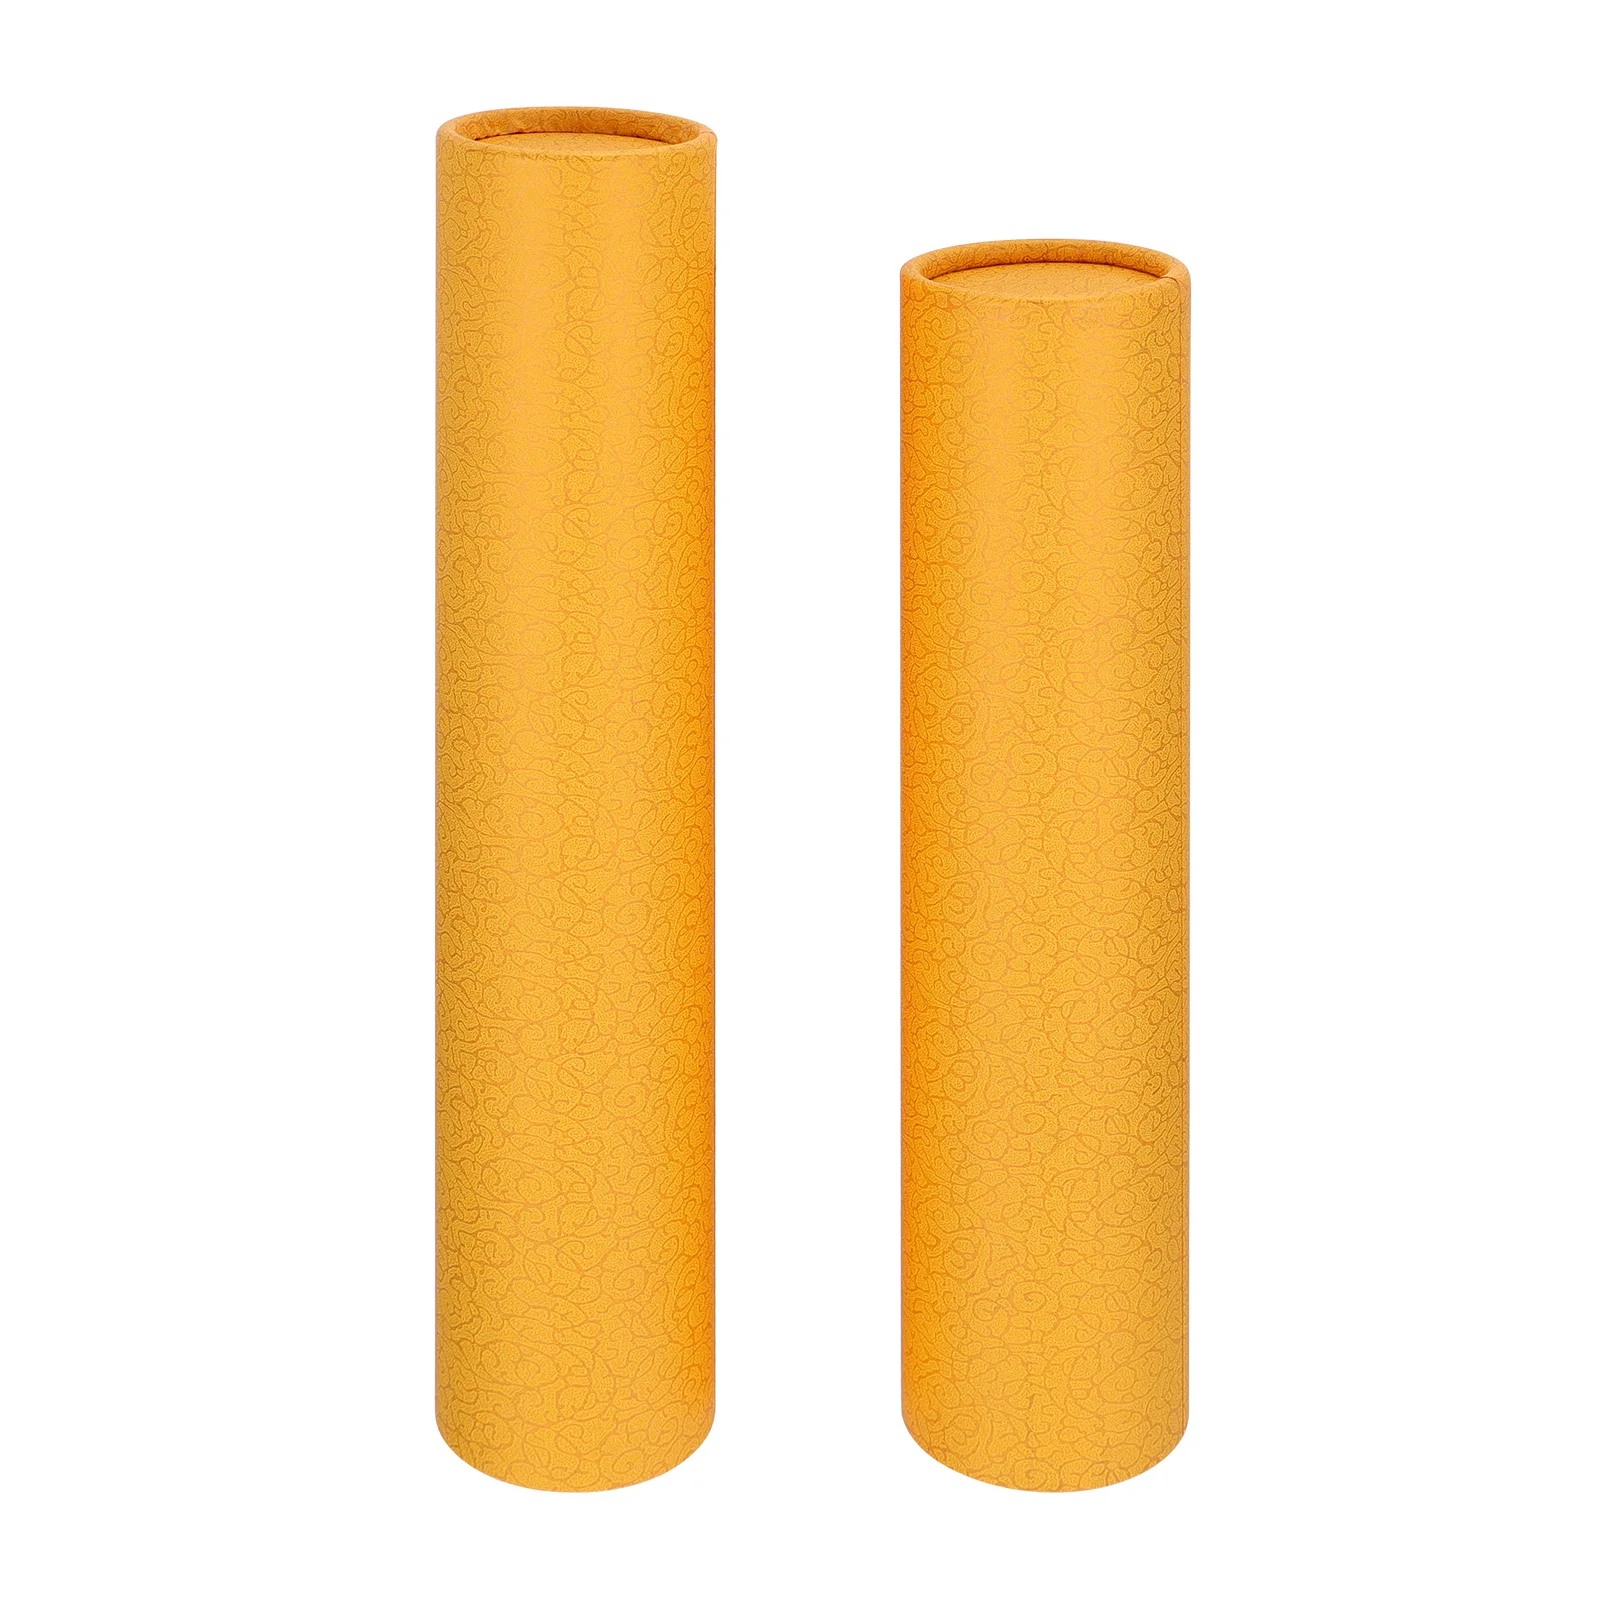 

Drawing Tube Telescoping Tube Paper Storage Tube Poster Tube Drawing Carrying Case Holder Yellow